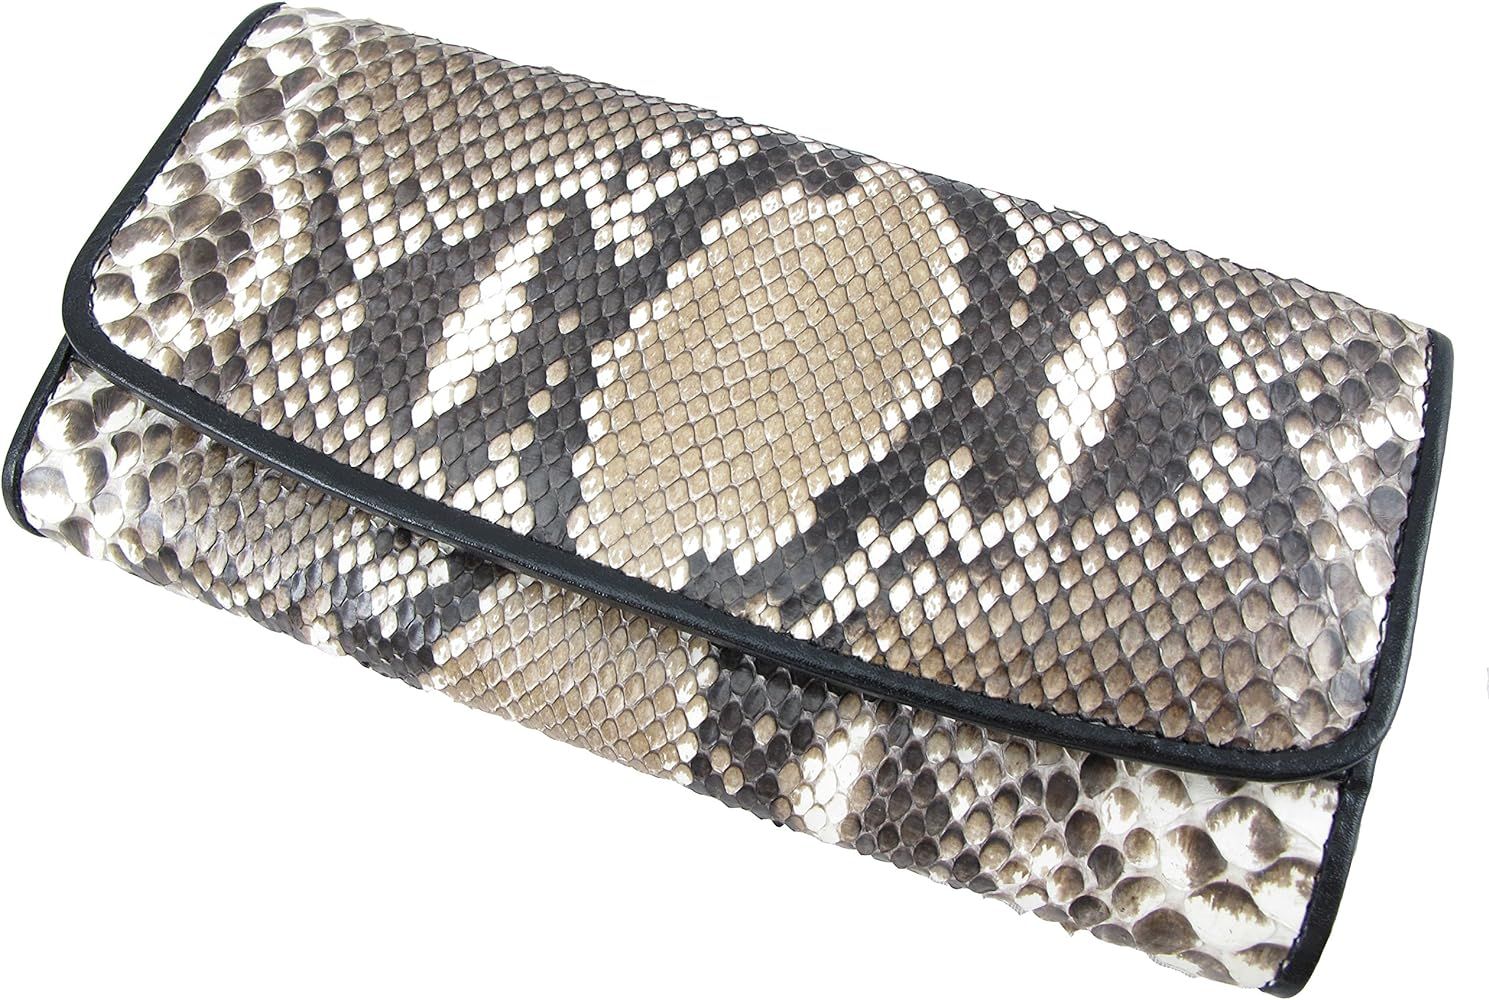 Genuine Python Snake Skin Leather Women's Trifold Clutch Wallet (Reticulated Natural) | Amazon (US)